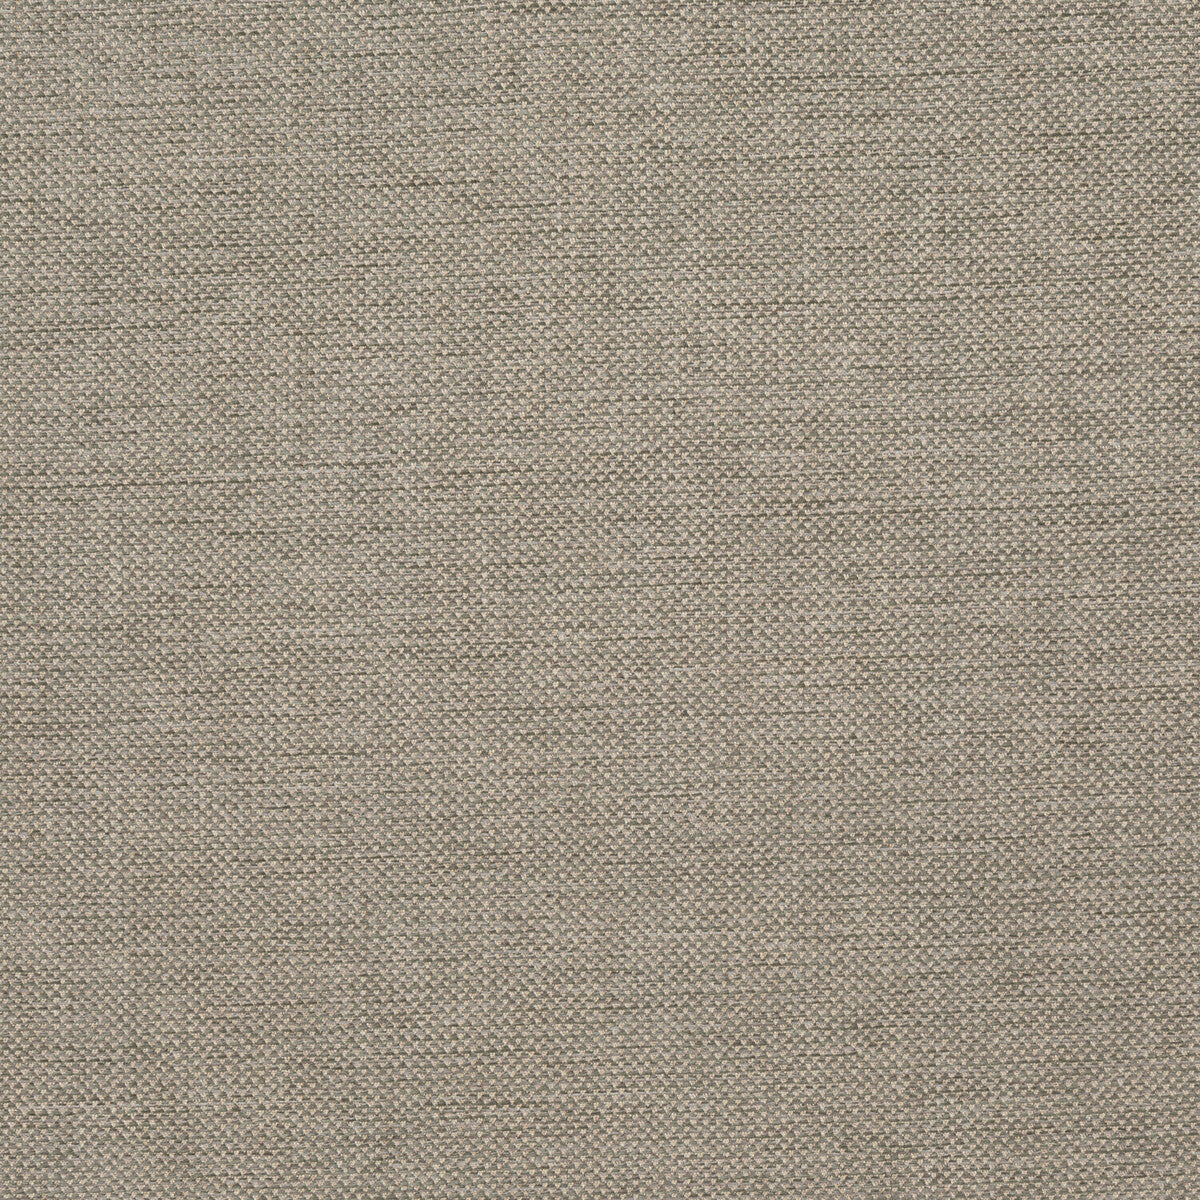 Webster fabric in mist color - pattern BFC-3713.113.0 - by Lee Jofa in the Blithfield Eden collection